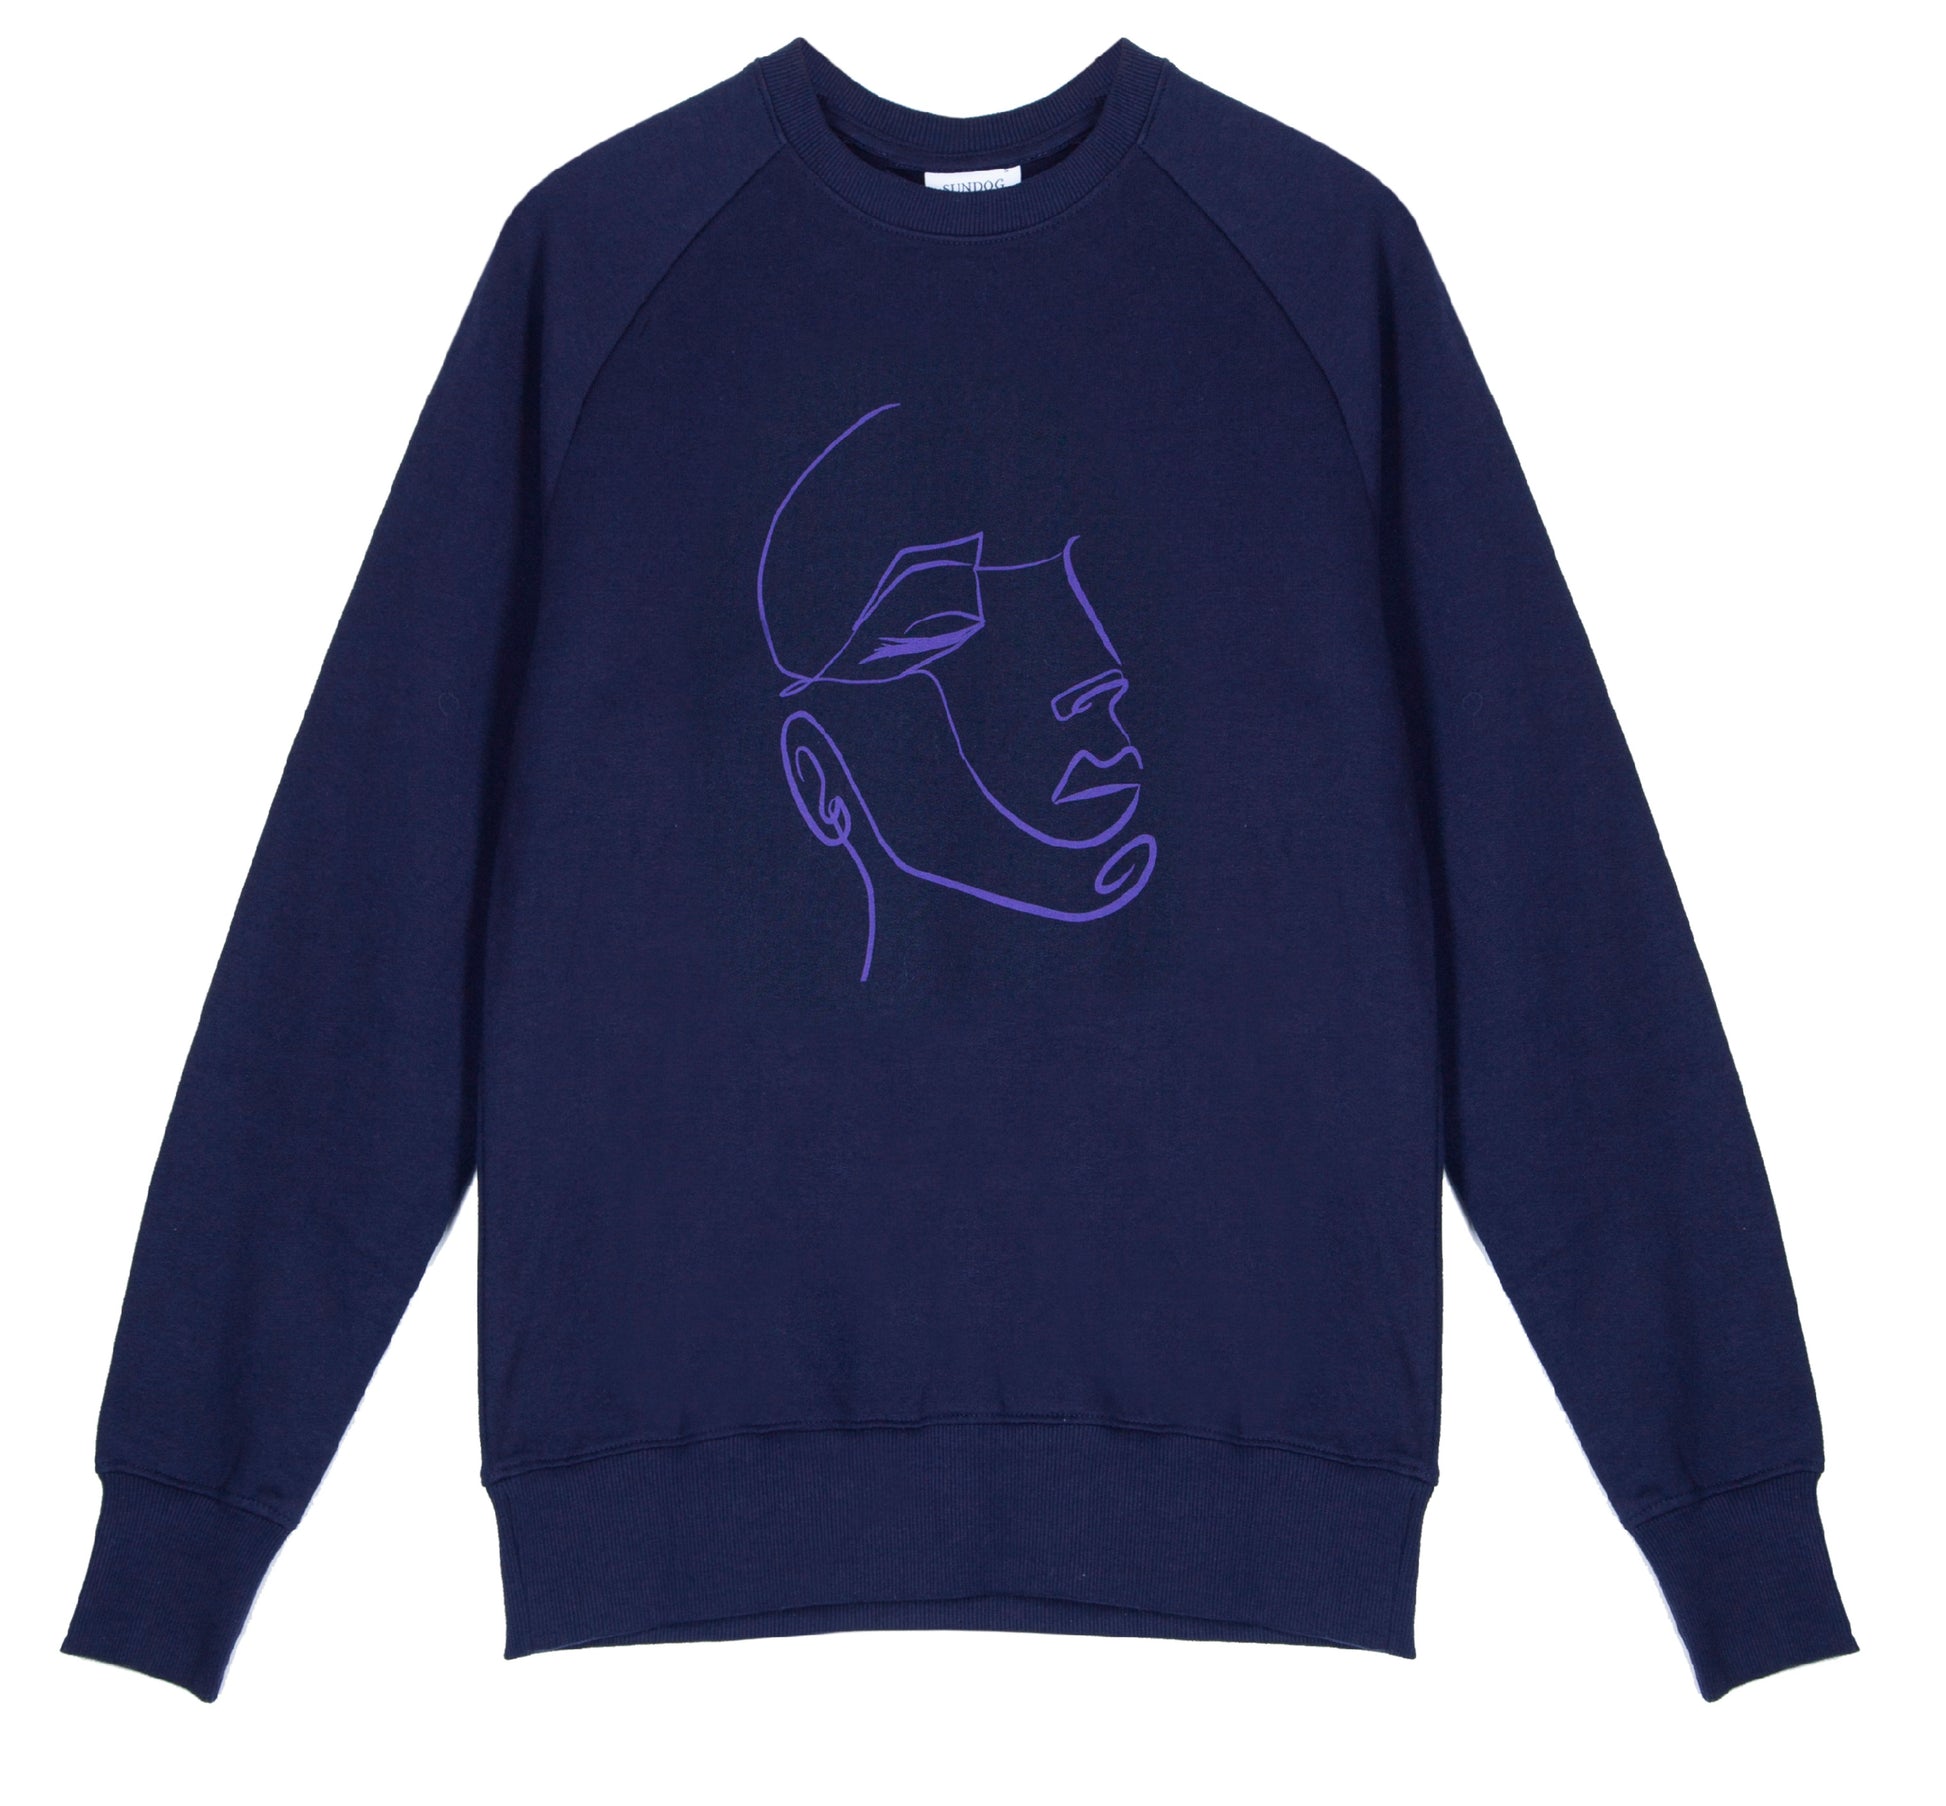 Unisex classic crew raglan sweatshirt, made from GOTS certified organic cotton with FaceIN print in Violet colour printed with plastic free inks